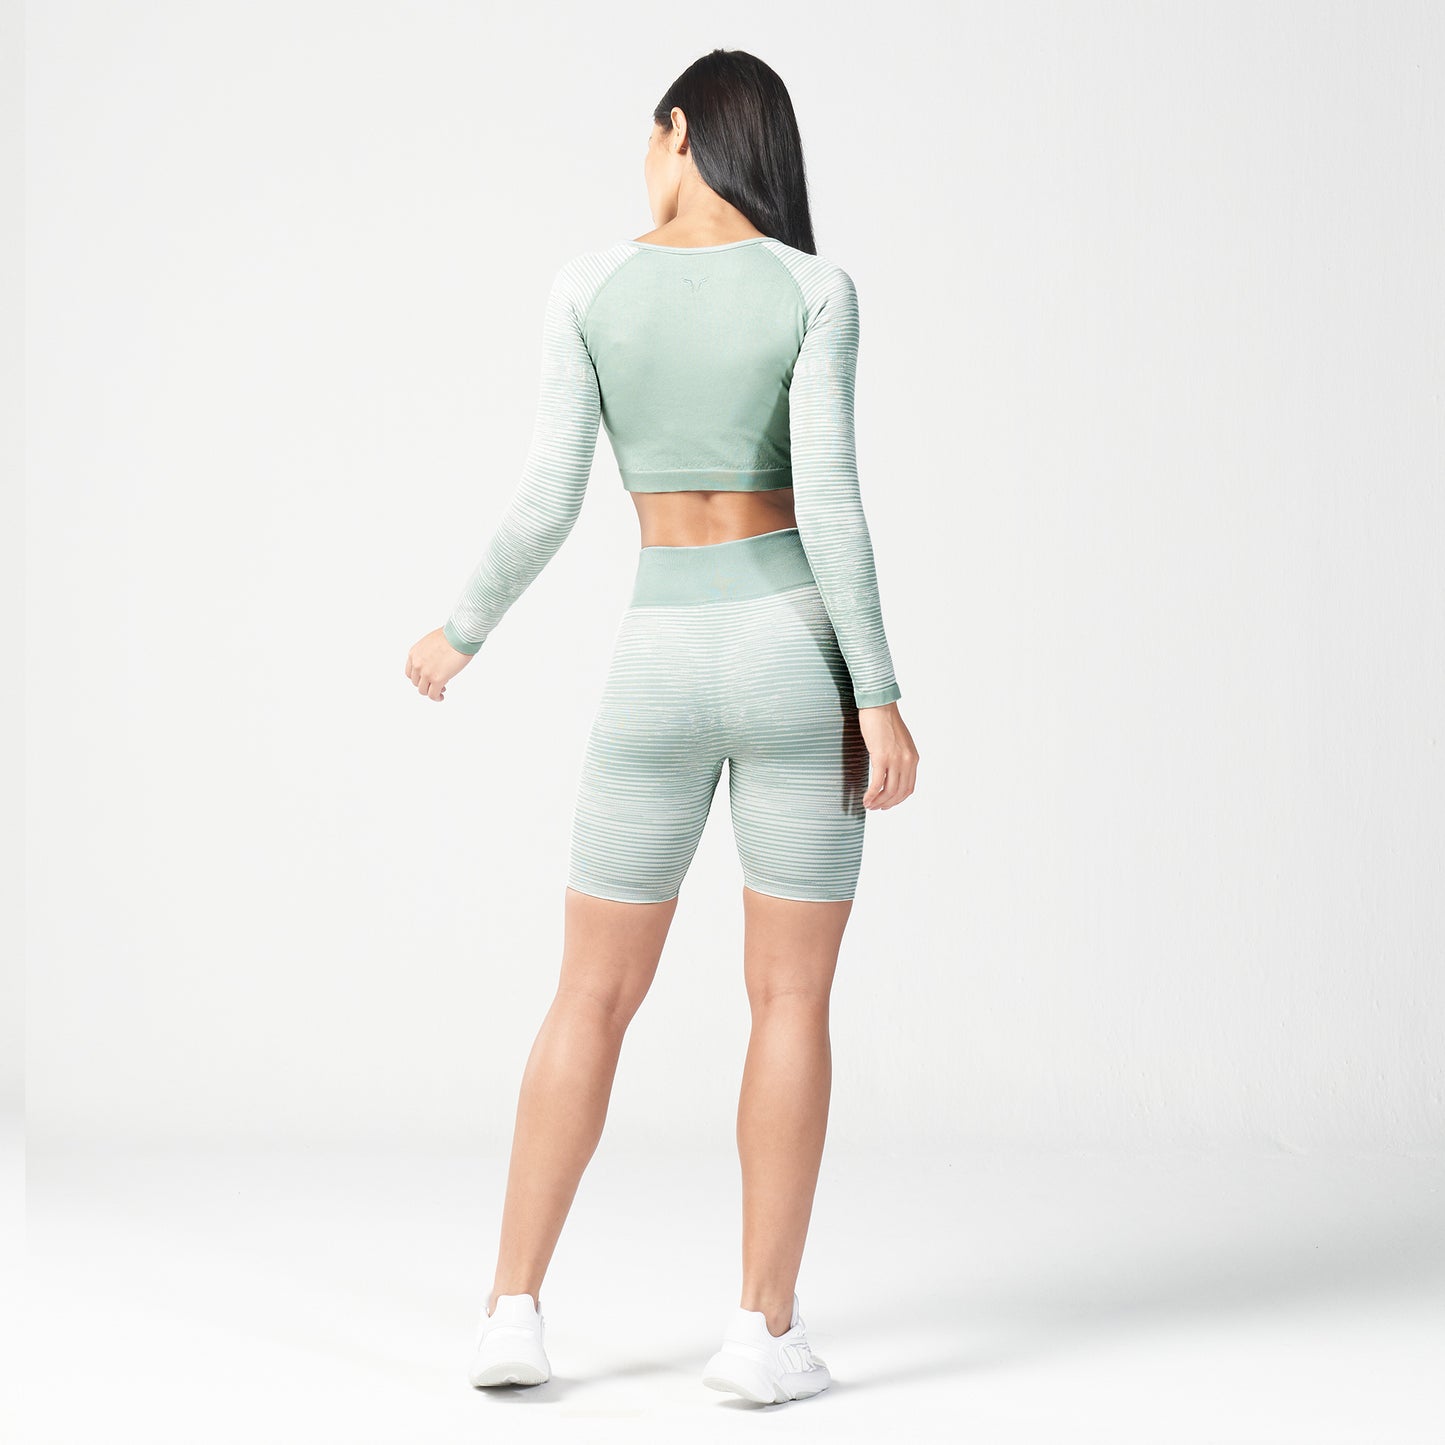 squatwolf-workout-clothes-infinity-stripe-seamless-shorts-green-surf-gym-shorts-for-women